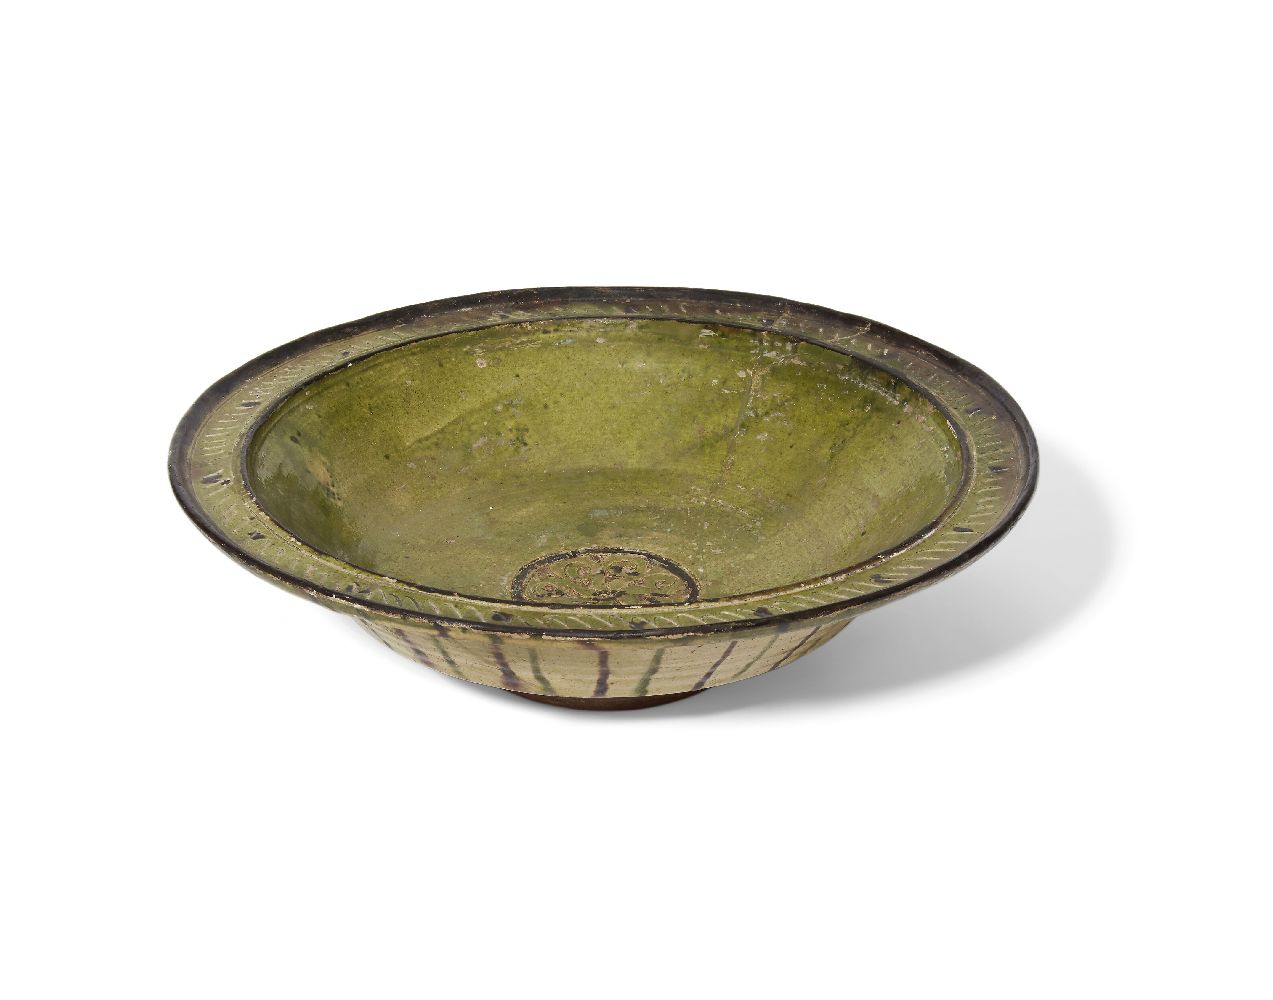 A large incised pottery green glazed bowl, Syria or Iran, 12th century, on a short foot, with an